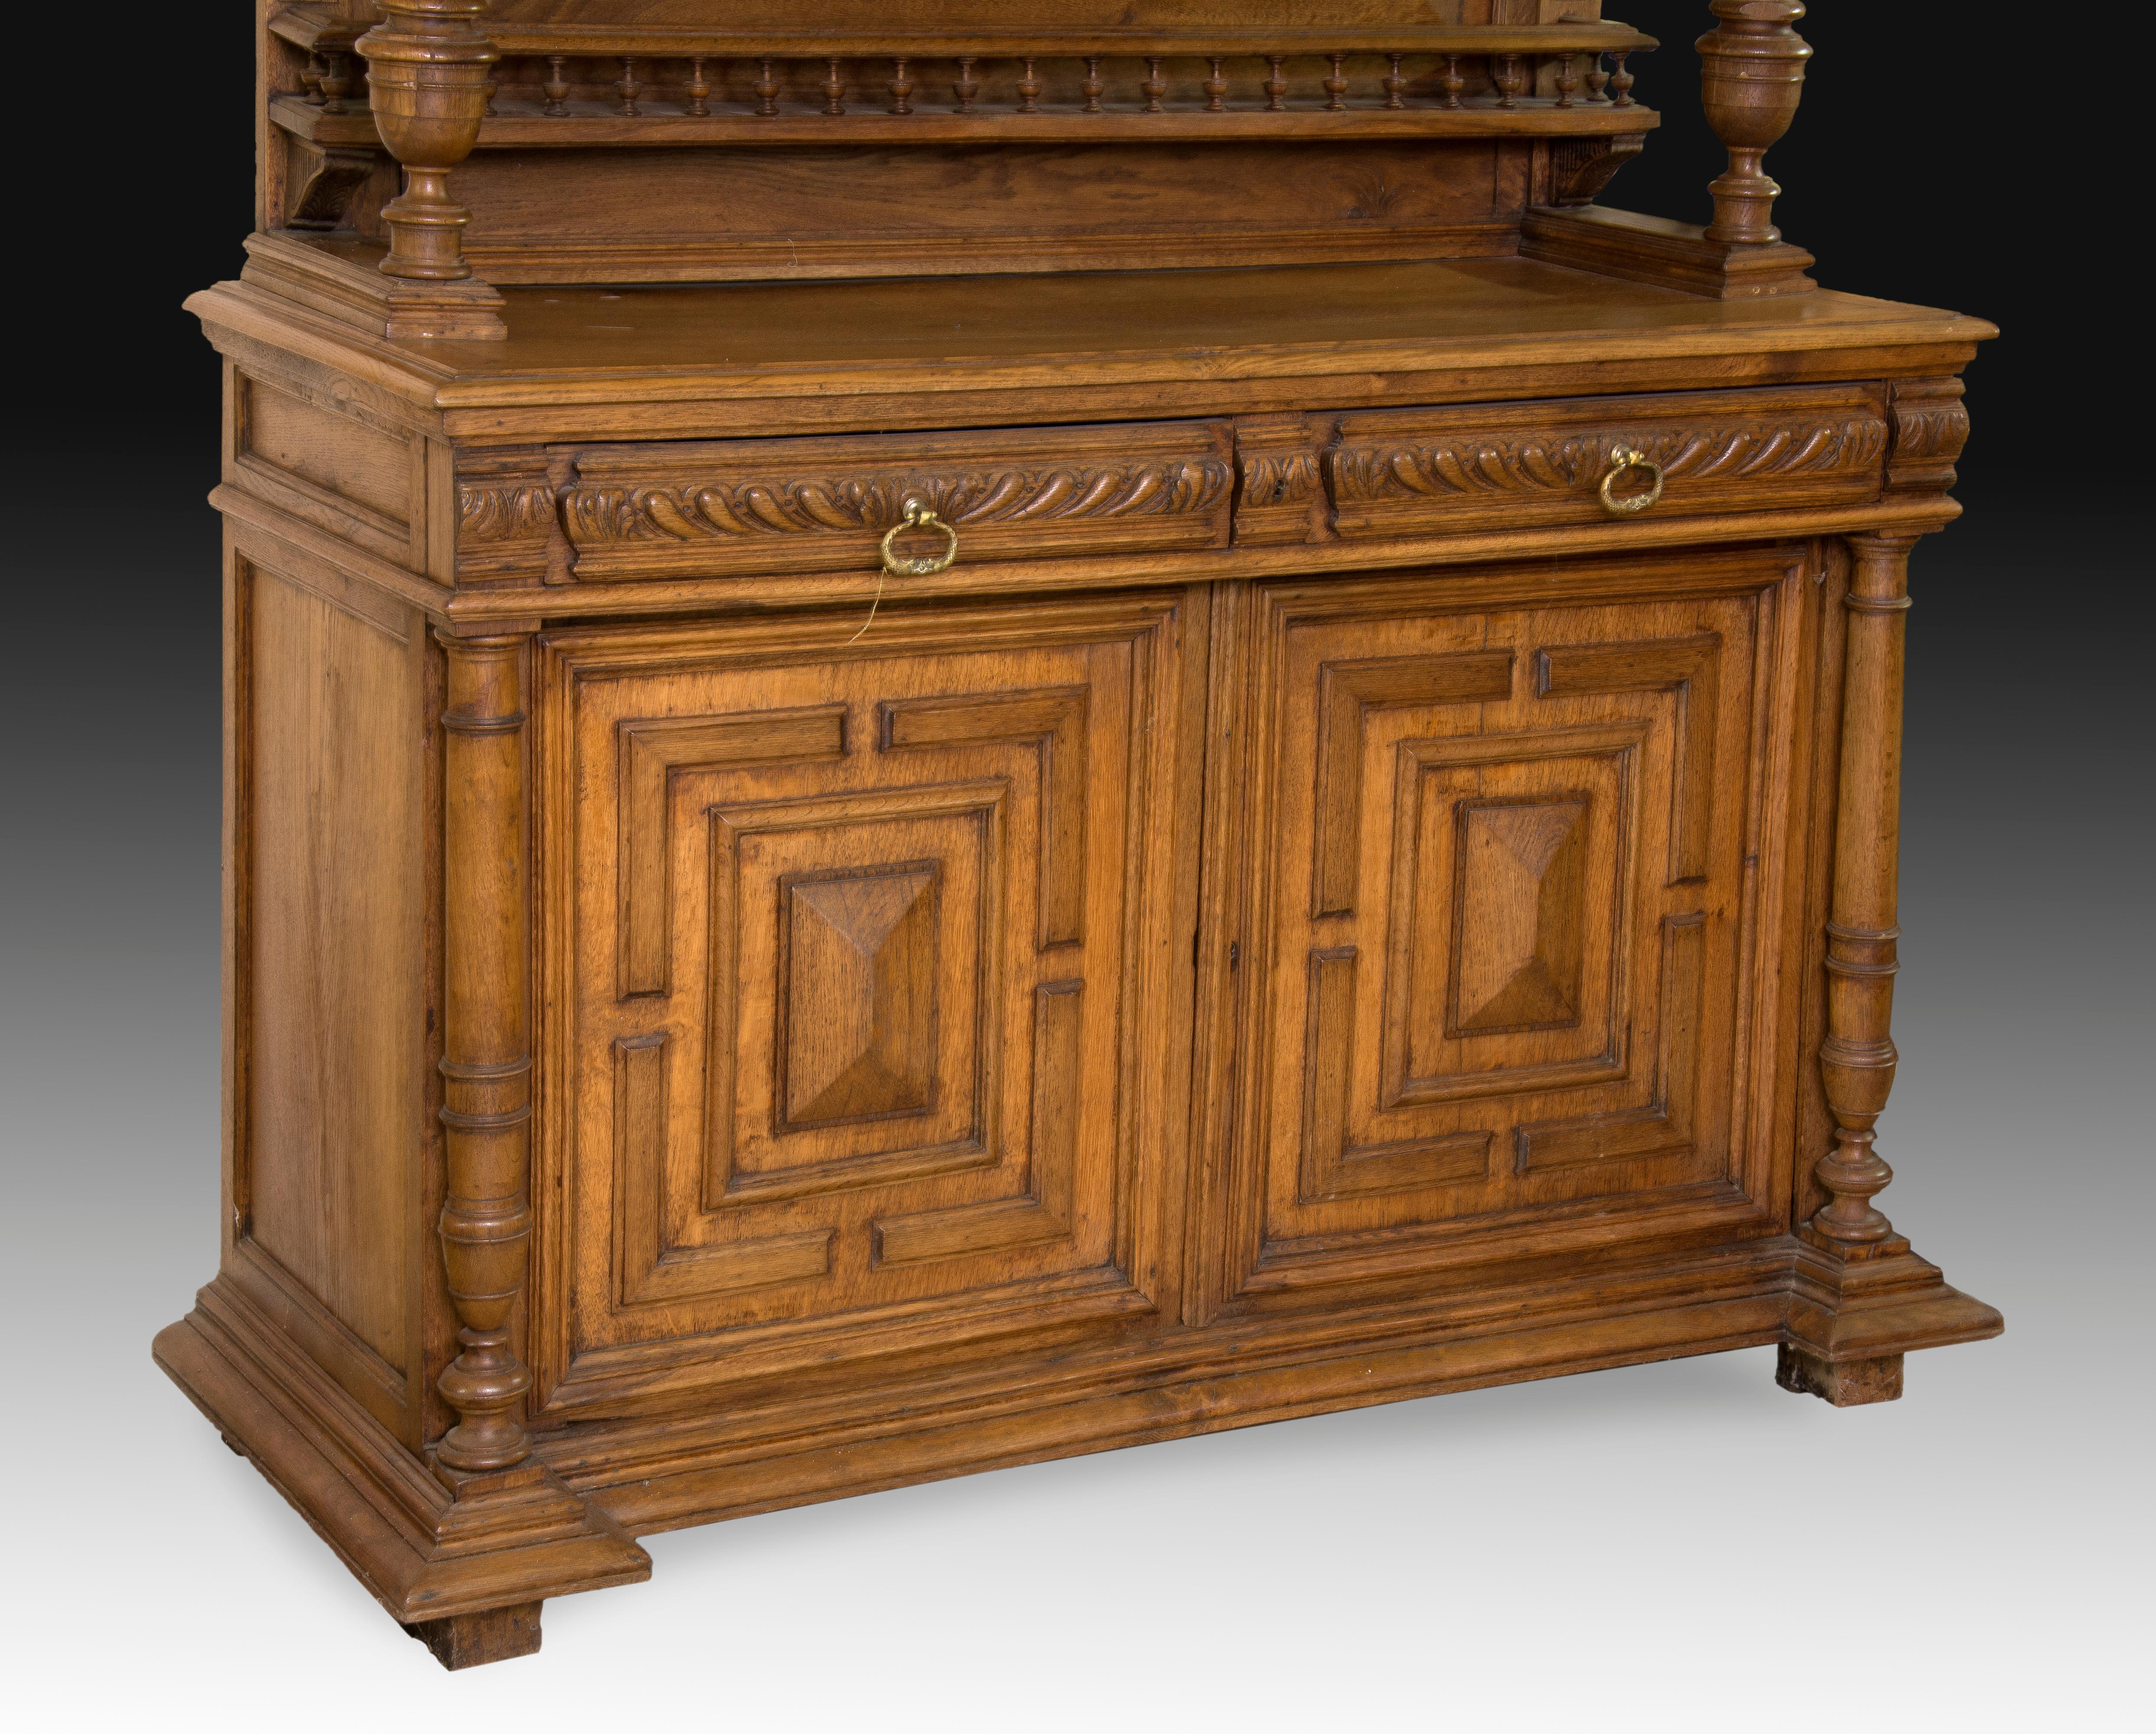 Carved oakwood sideboard composed of two bodies: the upper one has a display case with shelves, and a simple decoration with columns and a powerful molding reminiscent of certain neoclassical examples; the center presents a space flanked by columns